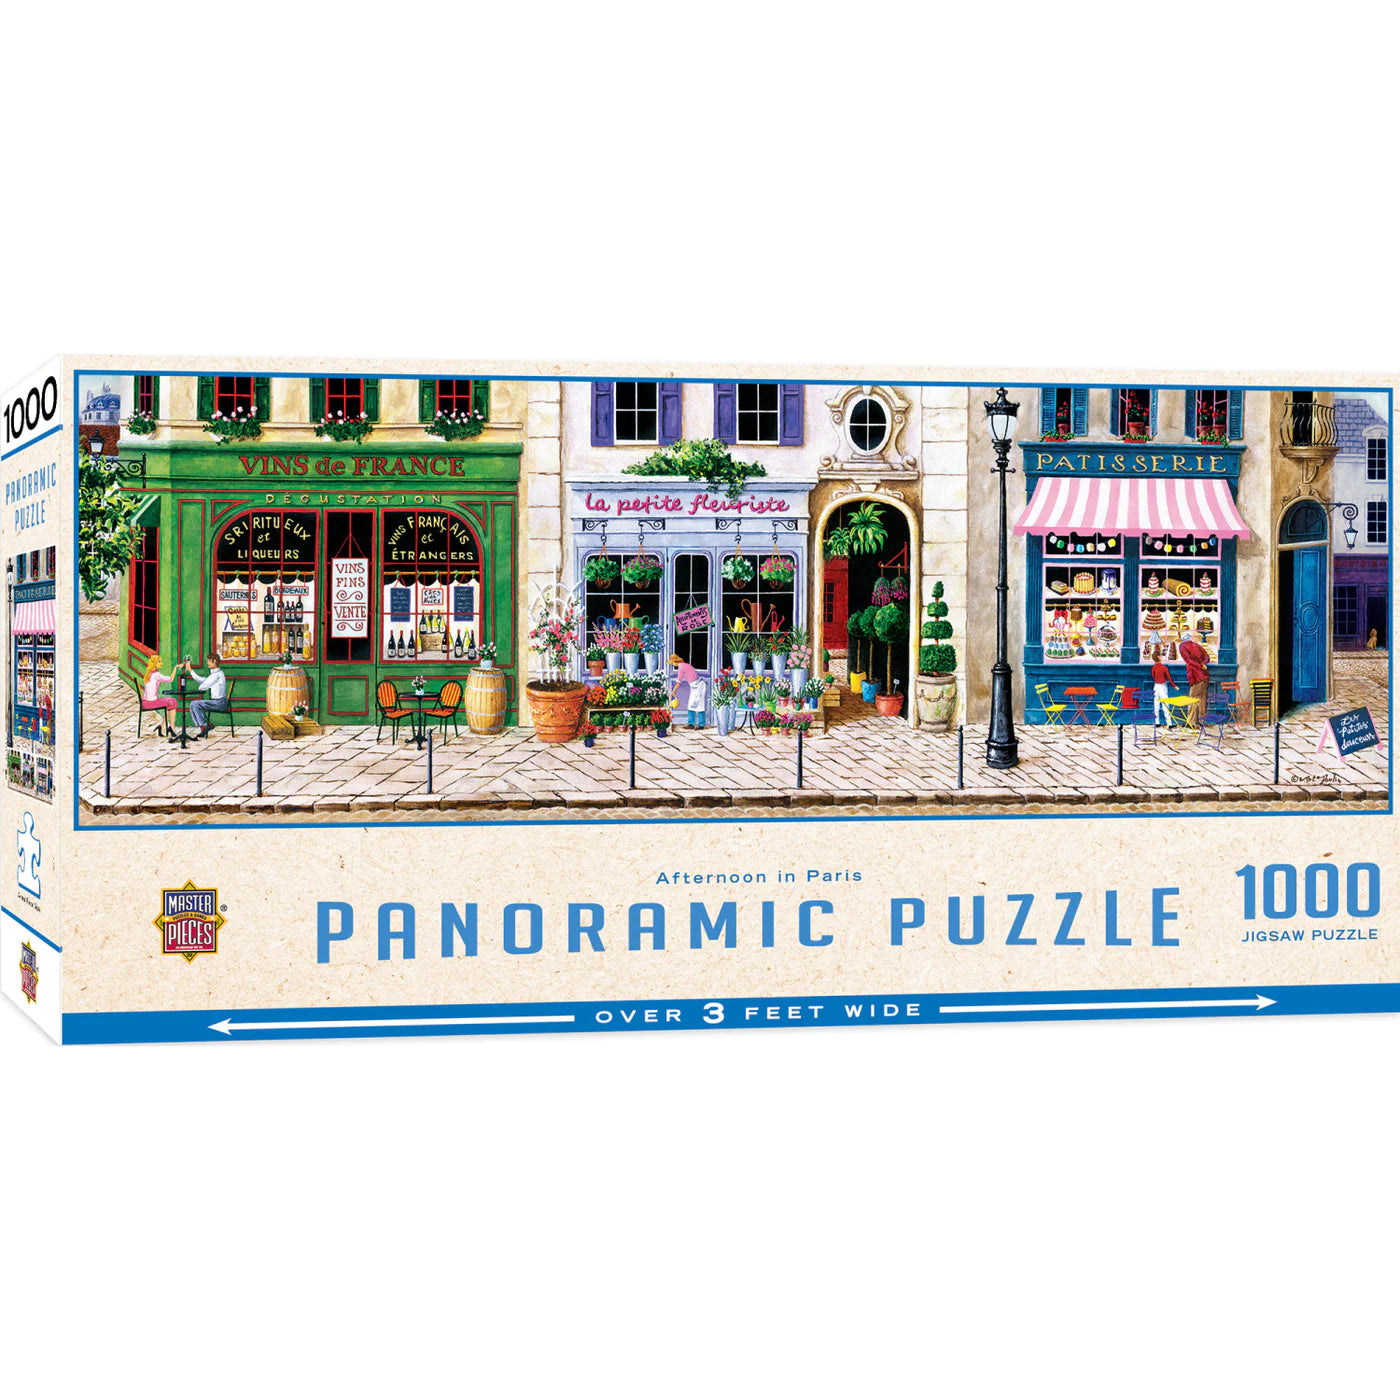 Afternoon in Paris Panoramic Jigsaw Puzzle: Brand new, 1000 pieces, measures 13" x 39". Art by Art Poulin. Made by Masterpieces.